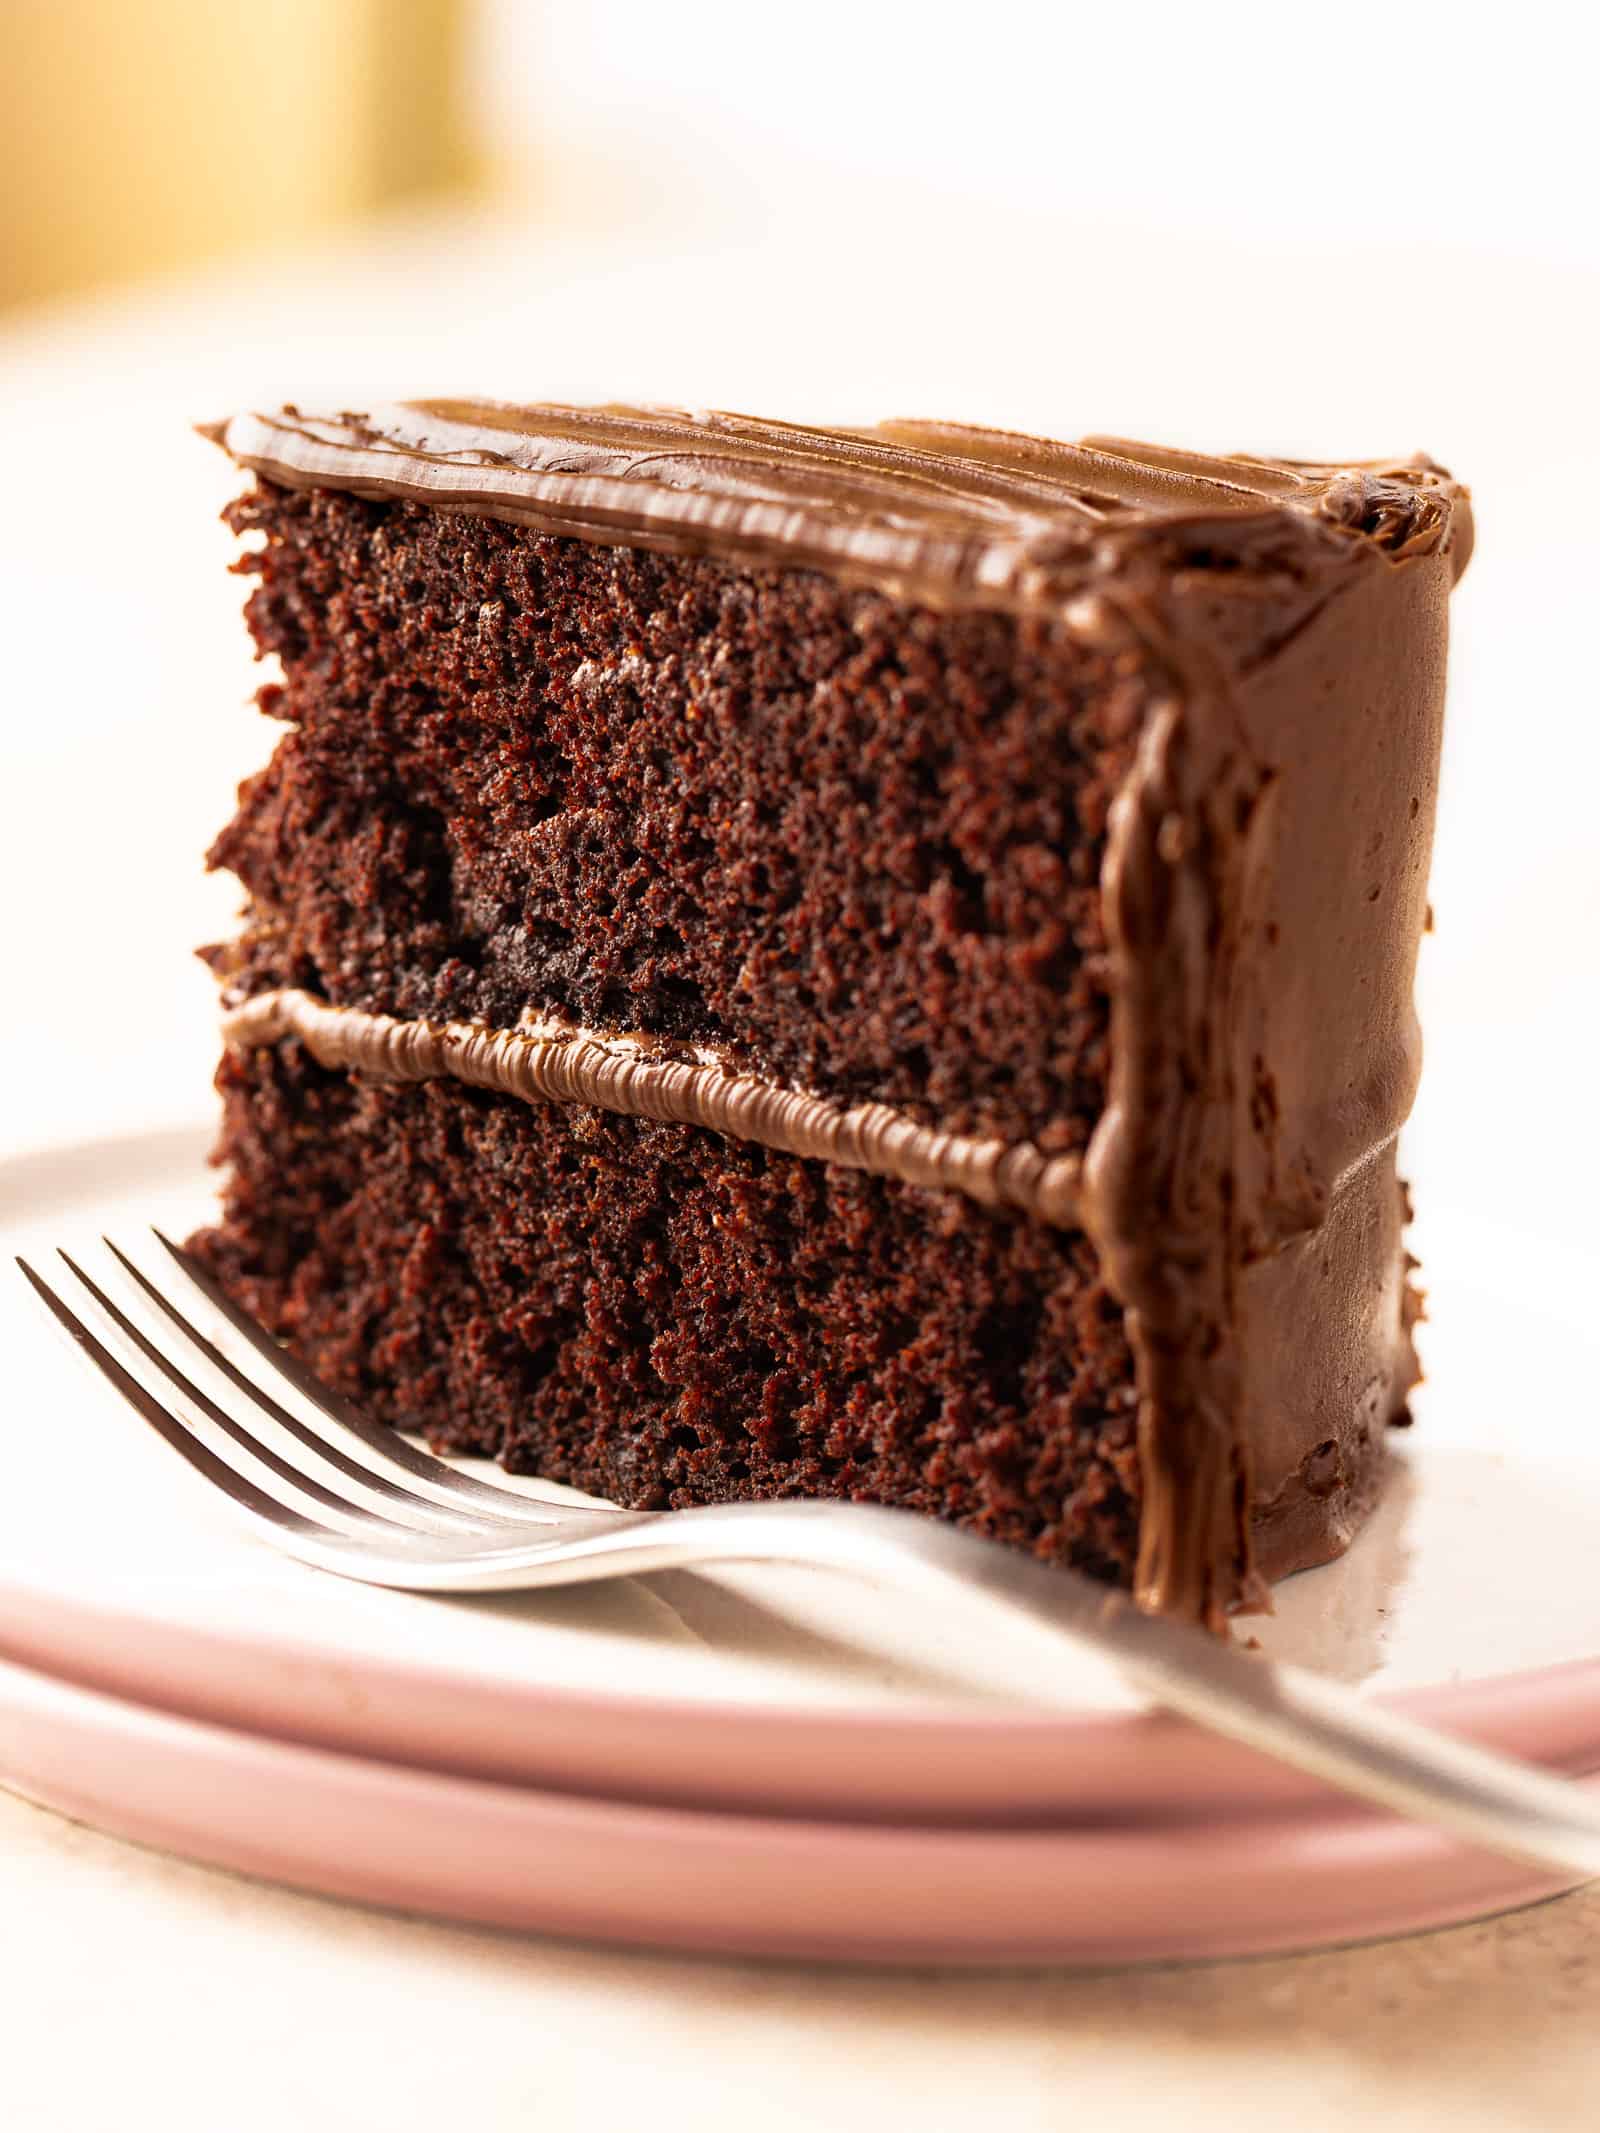 Gluten-free chocolate cake slice with chocolate frost on plate.